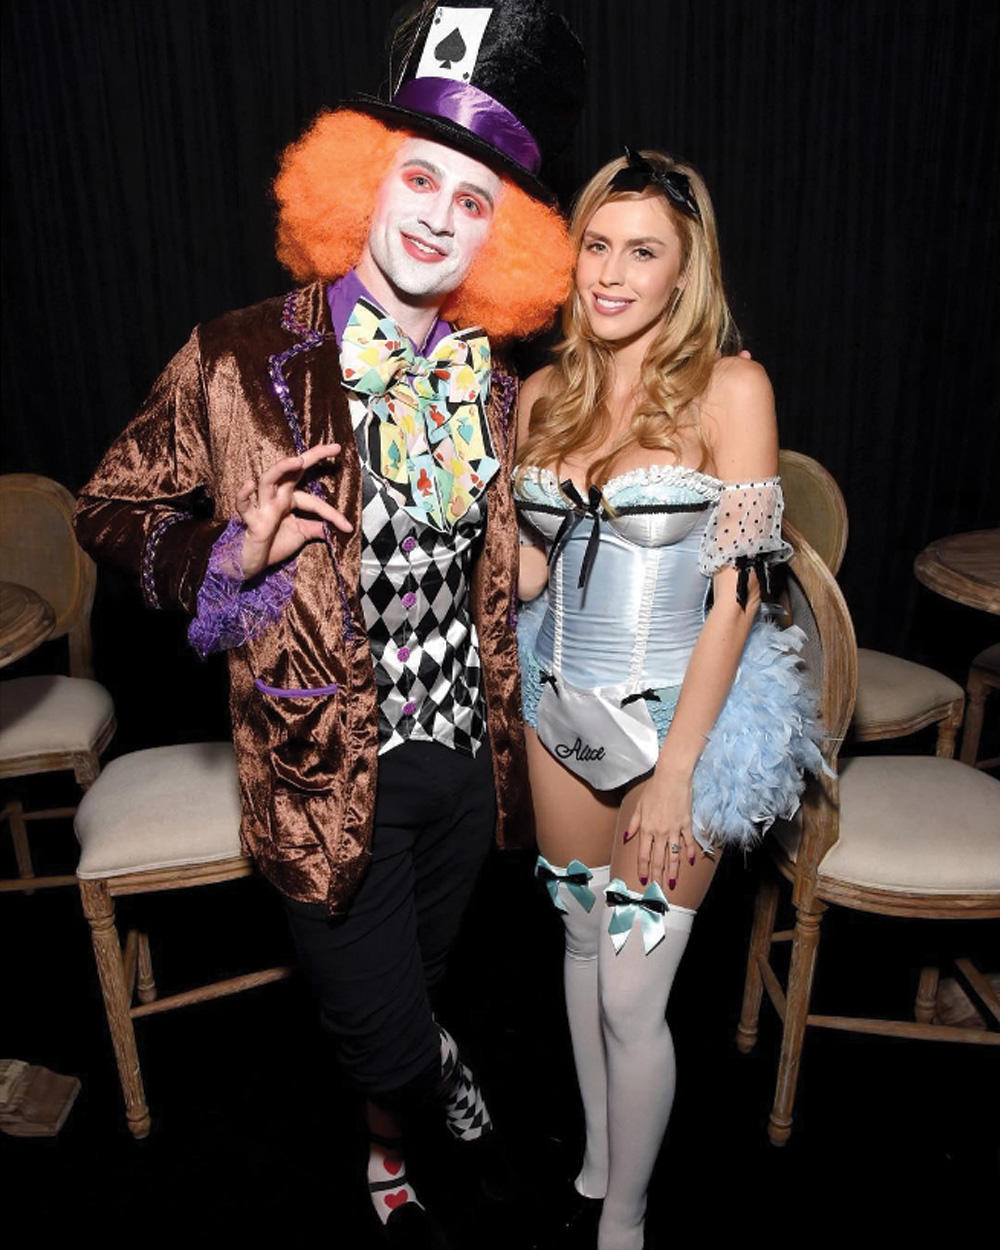 Olympic swimmer @ryanlochte as the Mad Hatter and companion as Alice in Wonderland